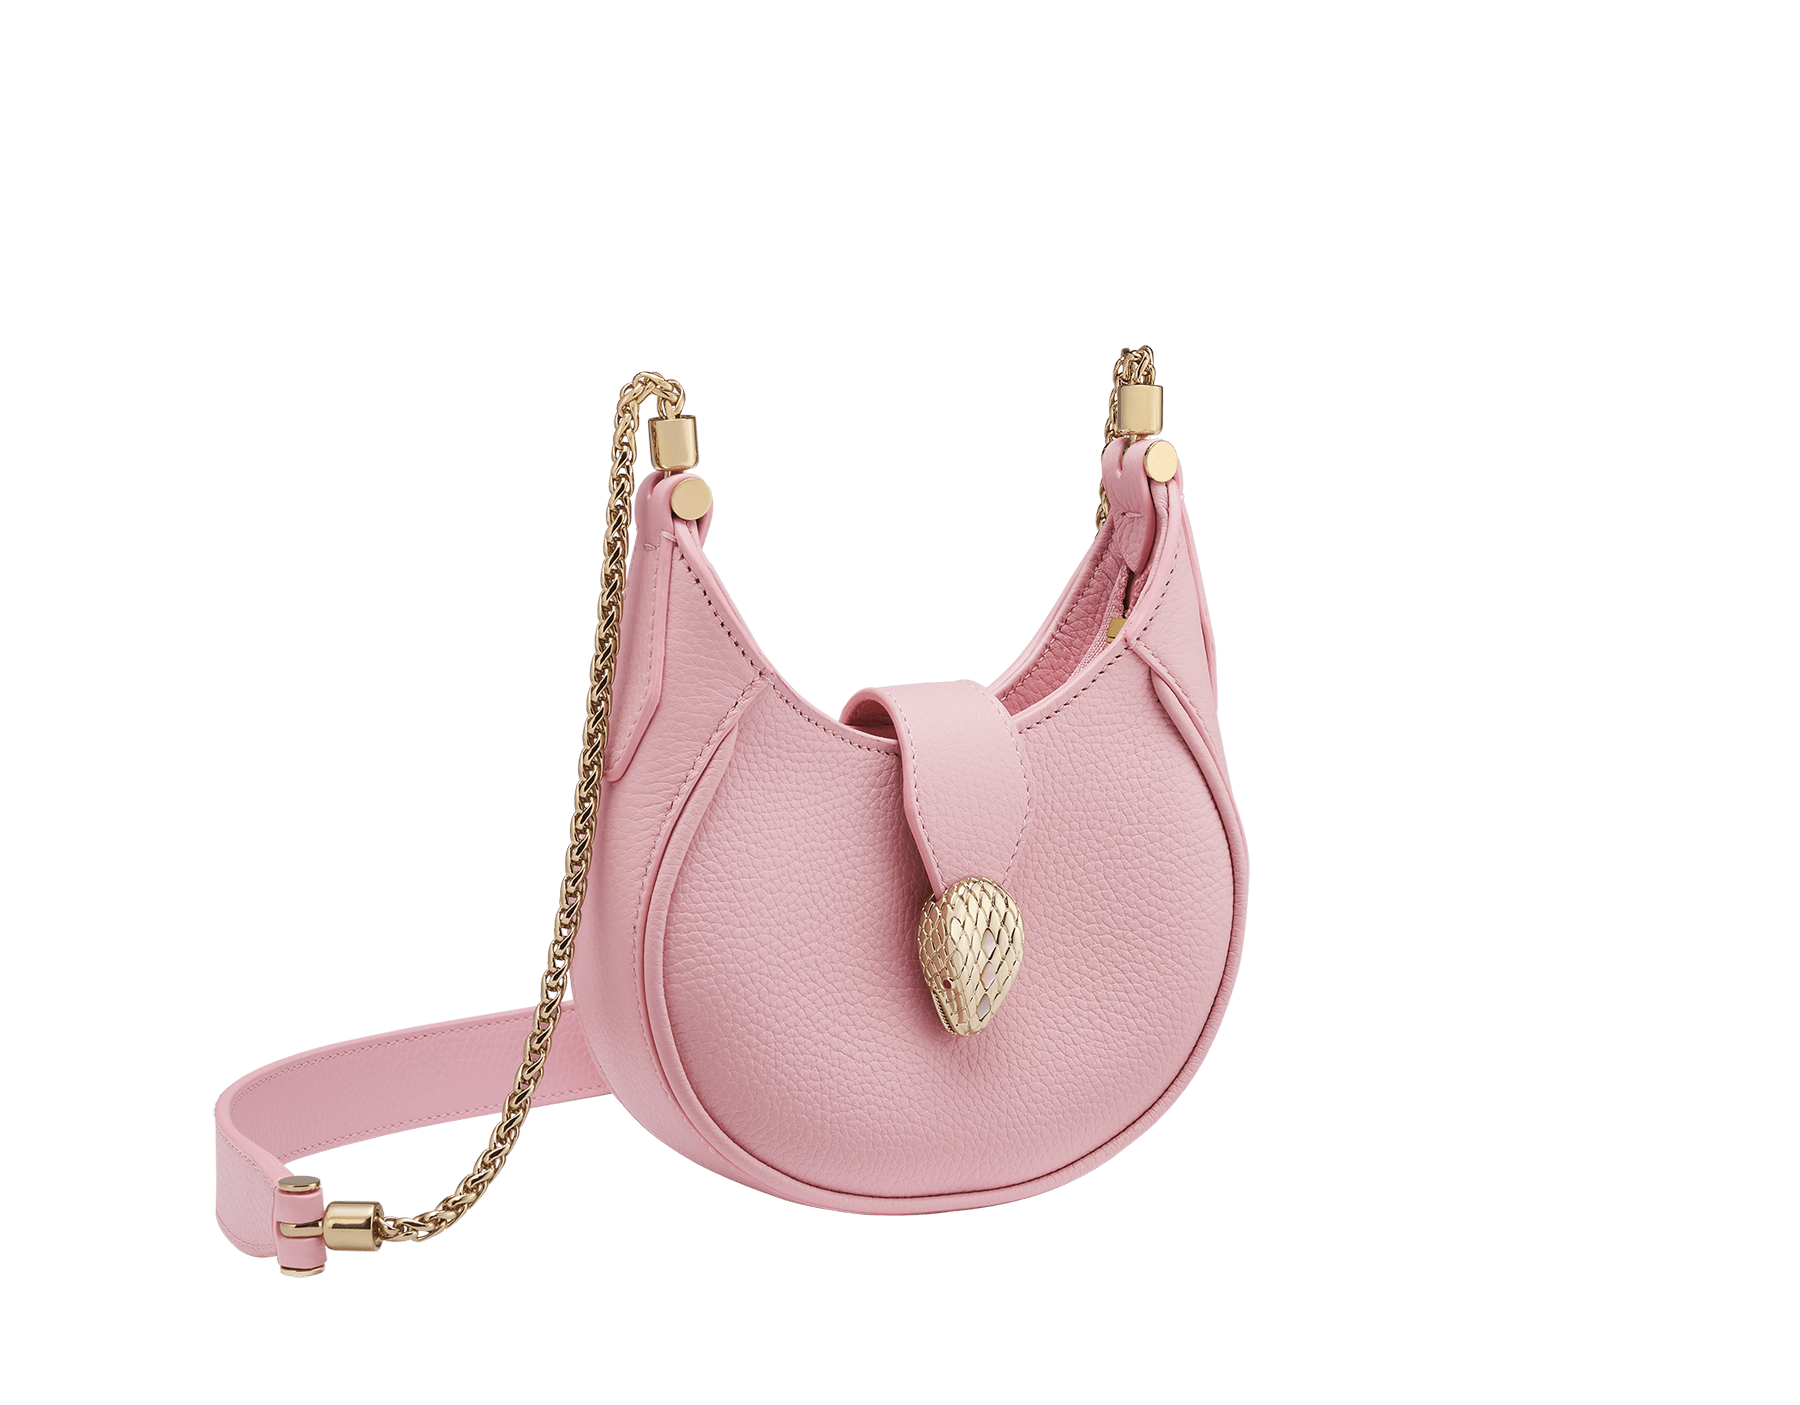 Serpenti Ellipse micro bag in soft, drummed, flash diamond white calf leather with taffy quartz pink grosgrain lining. Captivating snakehead closure in gold-plated brass embellished with mother-of-pearl scales and red enamel eyes, leather tab with magnet, and zipped fastening. SEA-MICROHOBOc image 1